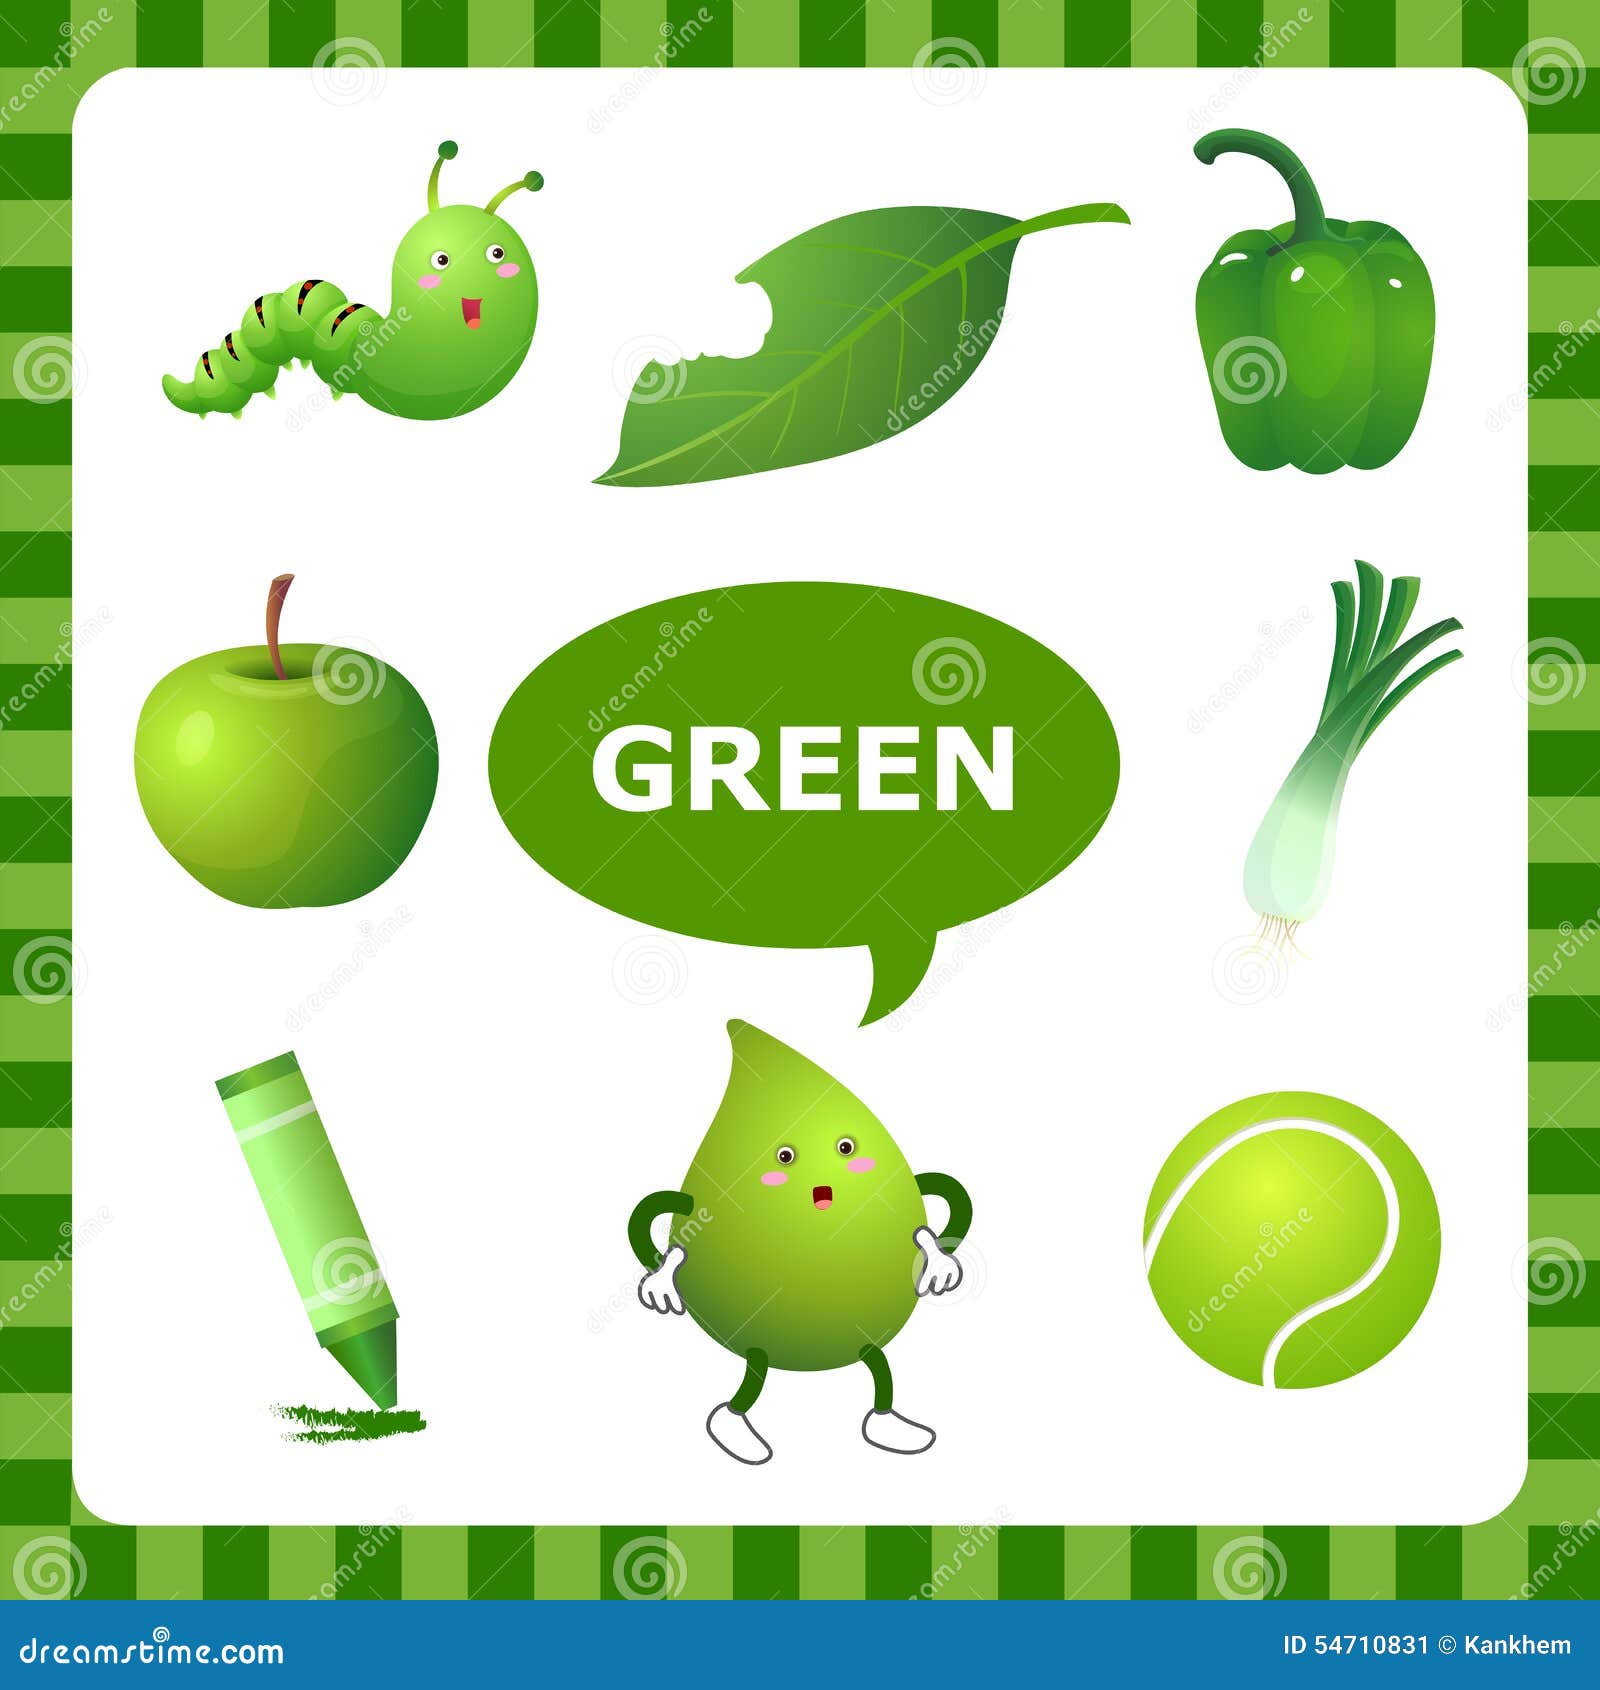 green objects clipart - photo #22